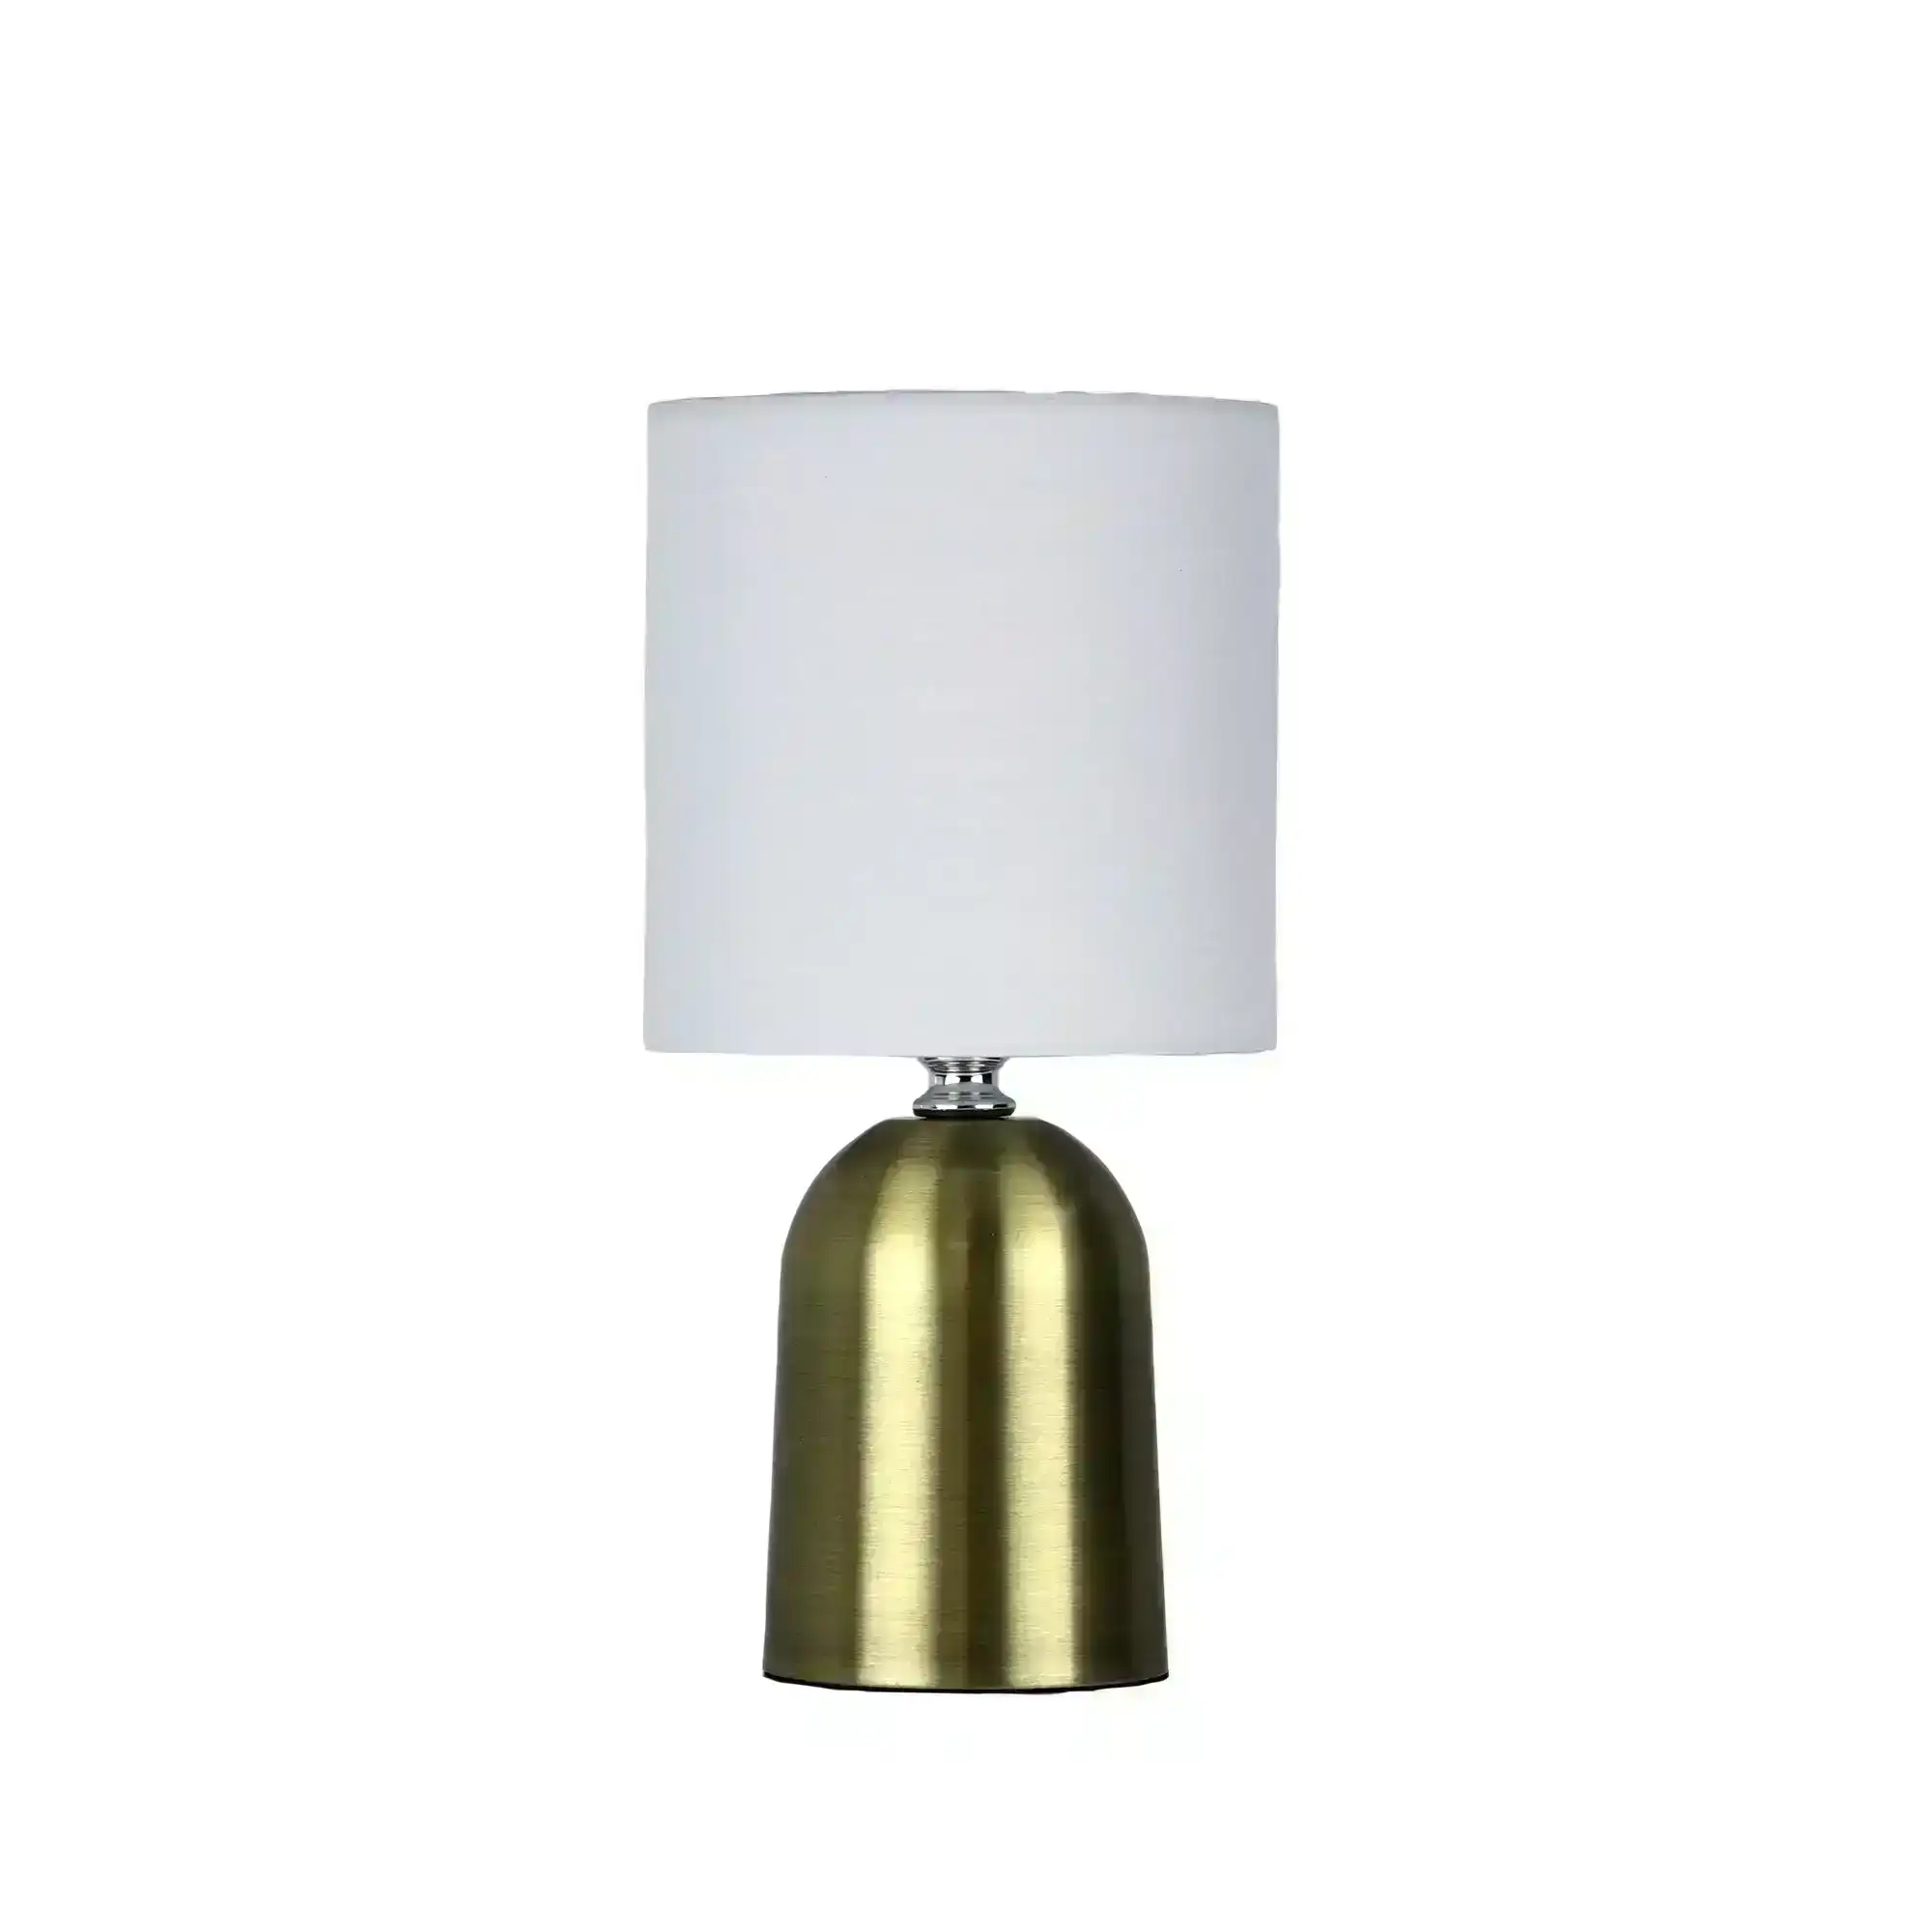 ESPEN ON / OFF Touch Lamp in Antique Brass Finish